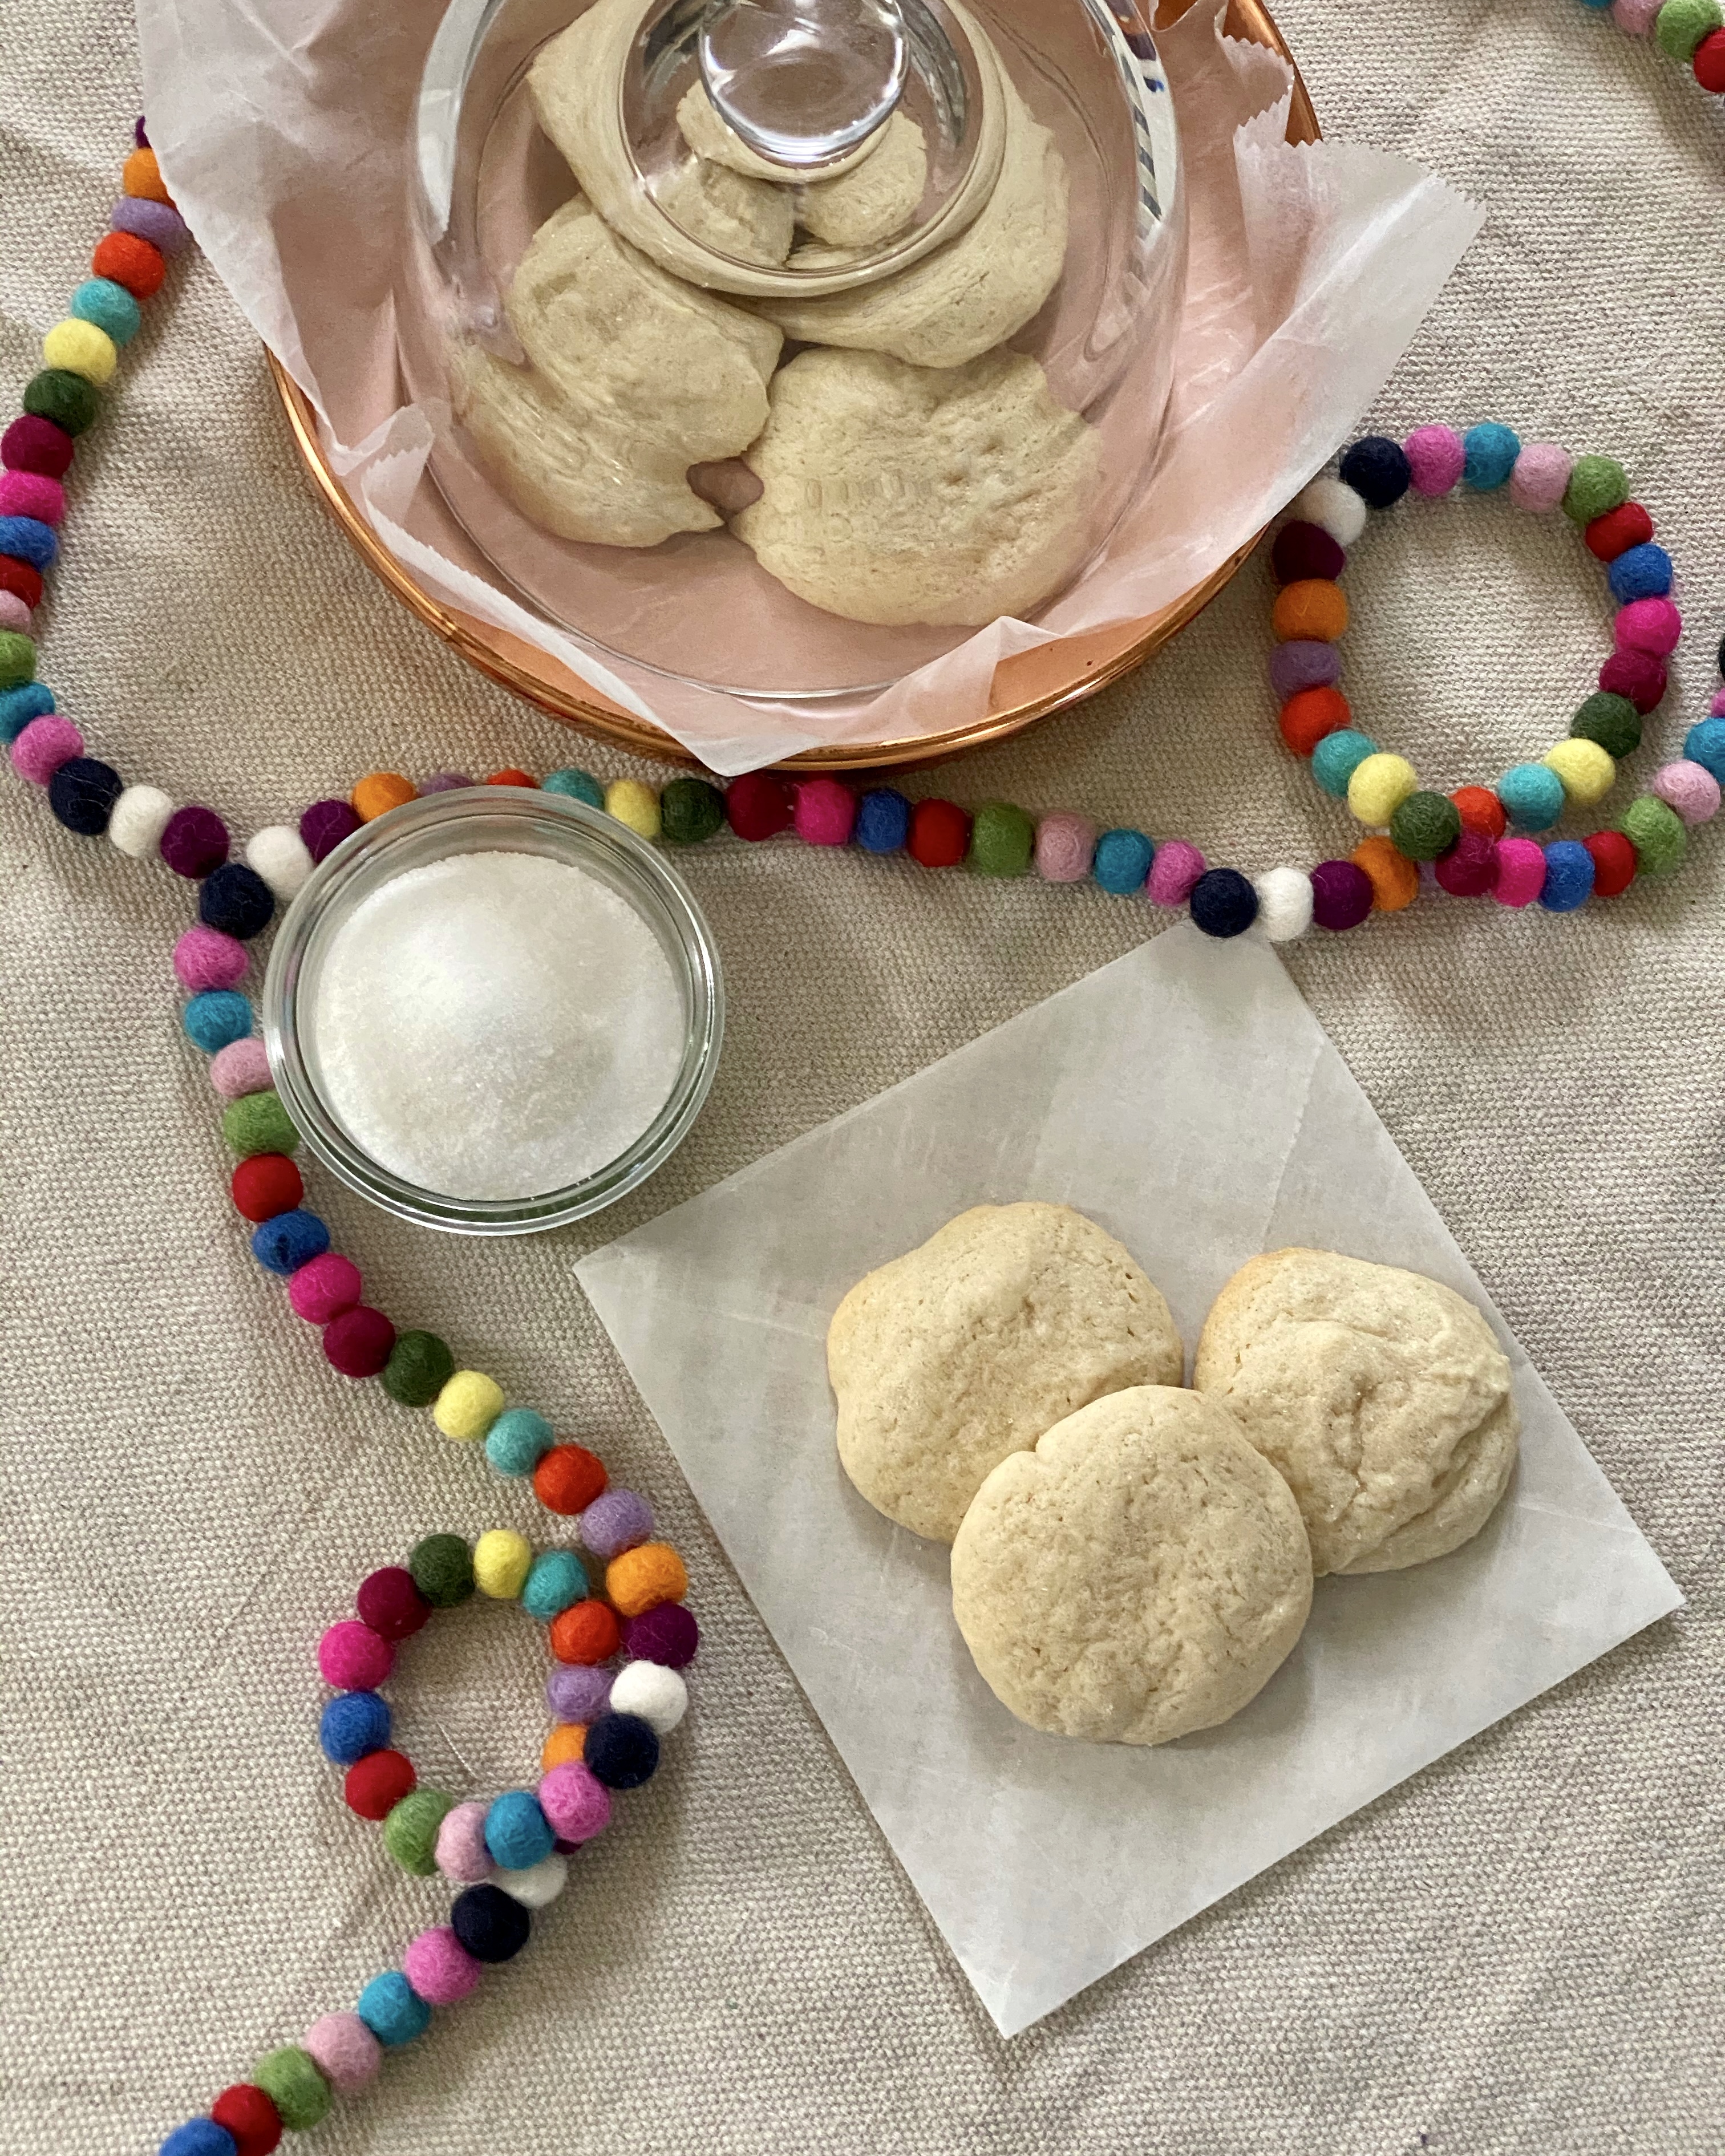 Us Navy Sugar Cookie Recipe: A Delicious Treat Straight from the Sea